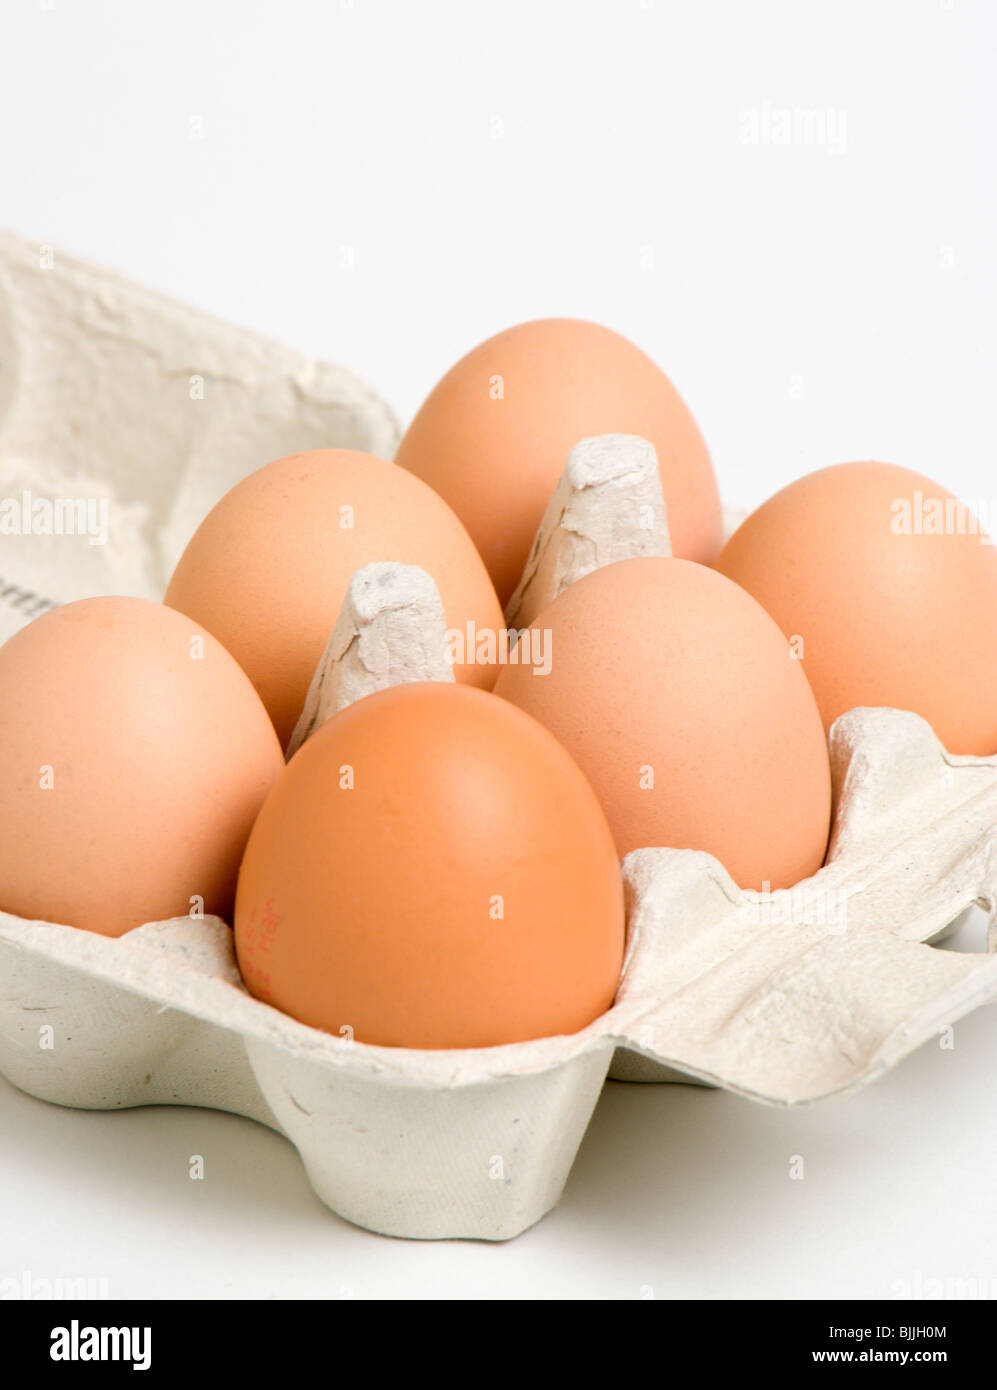 Food, Uncooked, Eggs, Box of six free range eggs on a white background. Stock Photo